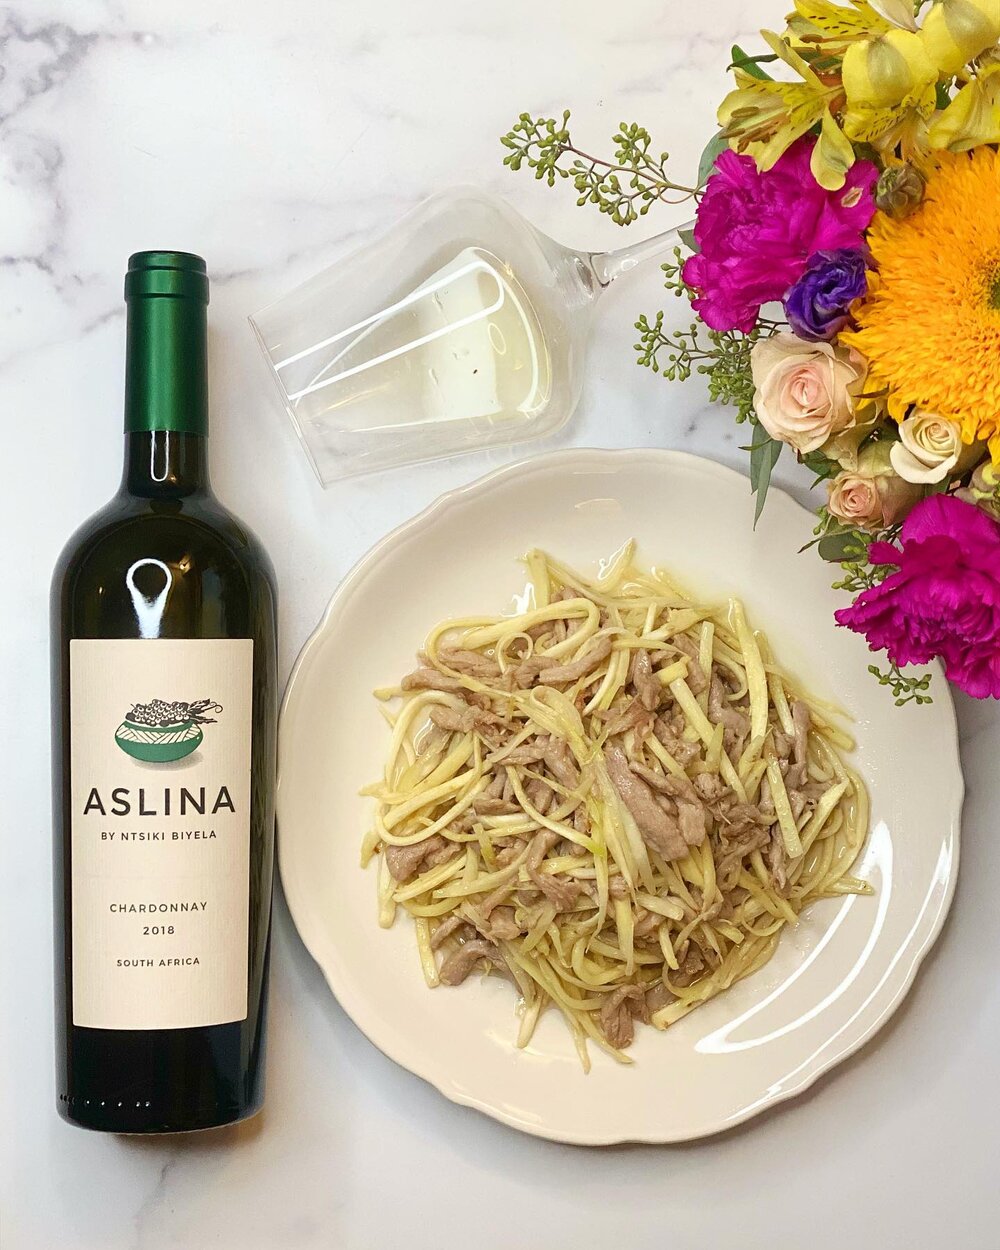 Stir-fried Water Bamboo Shoots with Shredded Pork (茭白筍炒肉絲) + 2018 @aslina_wines Chardonnay South Africa 🇿🇦 ​
&nbsp;​
Water Bamboo Shoots, aka Manchurian wild rice (the name is misleading as this plant was originally grown as a grain but now raised 